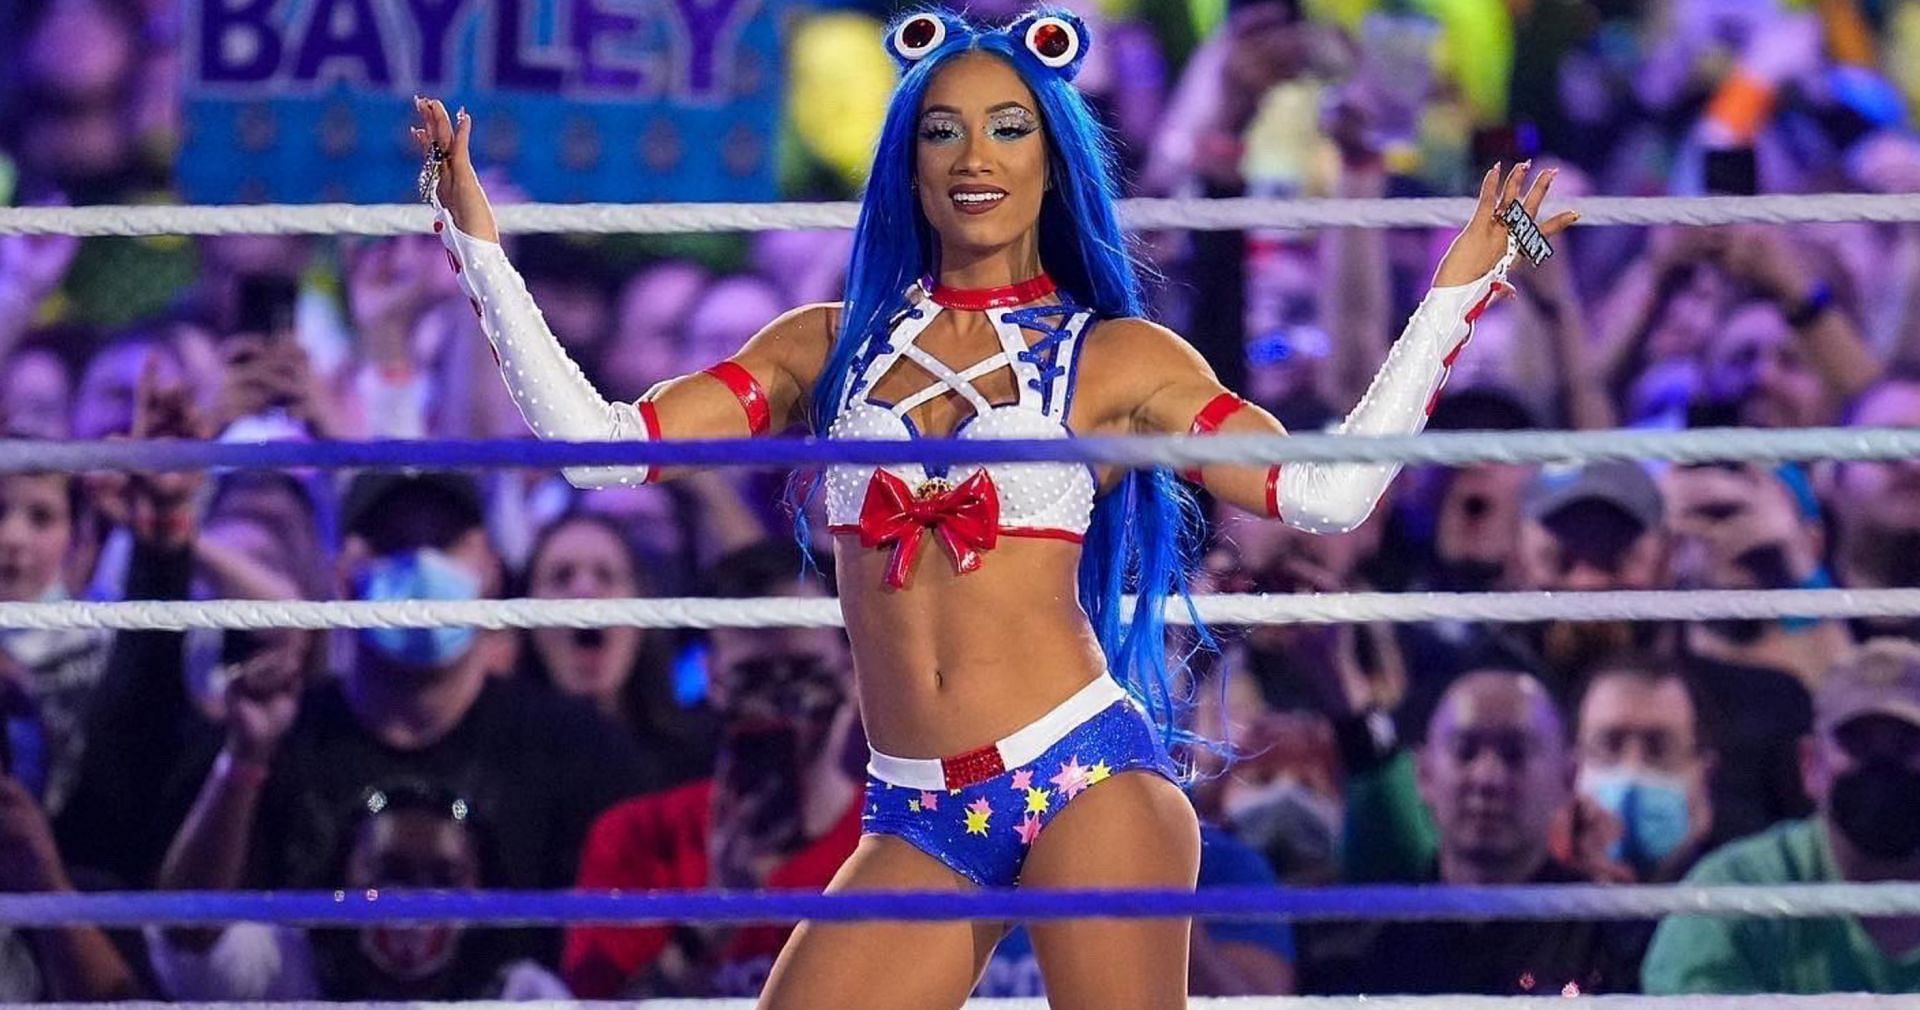 Sasha Banks might be teaming up with an old friend for WrestleMania 38.